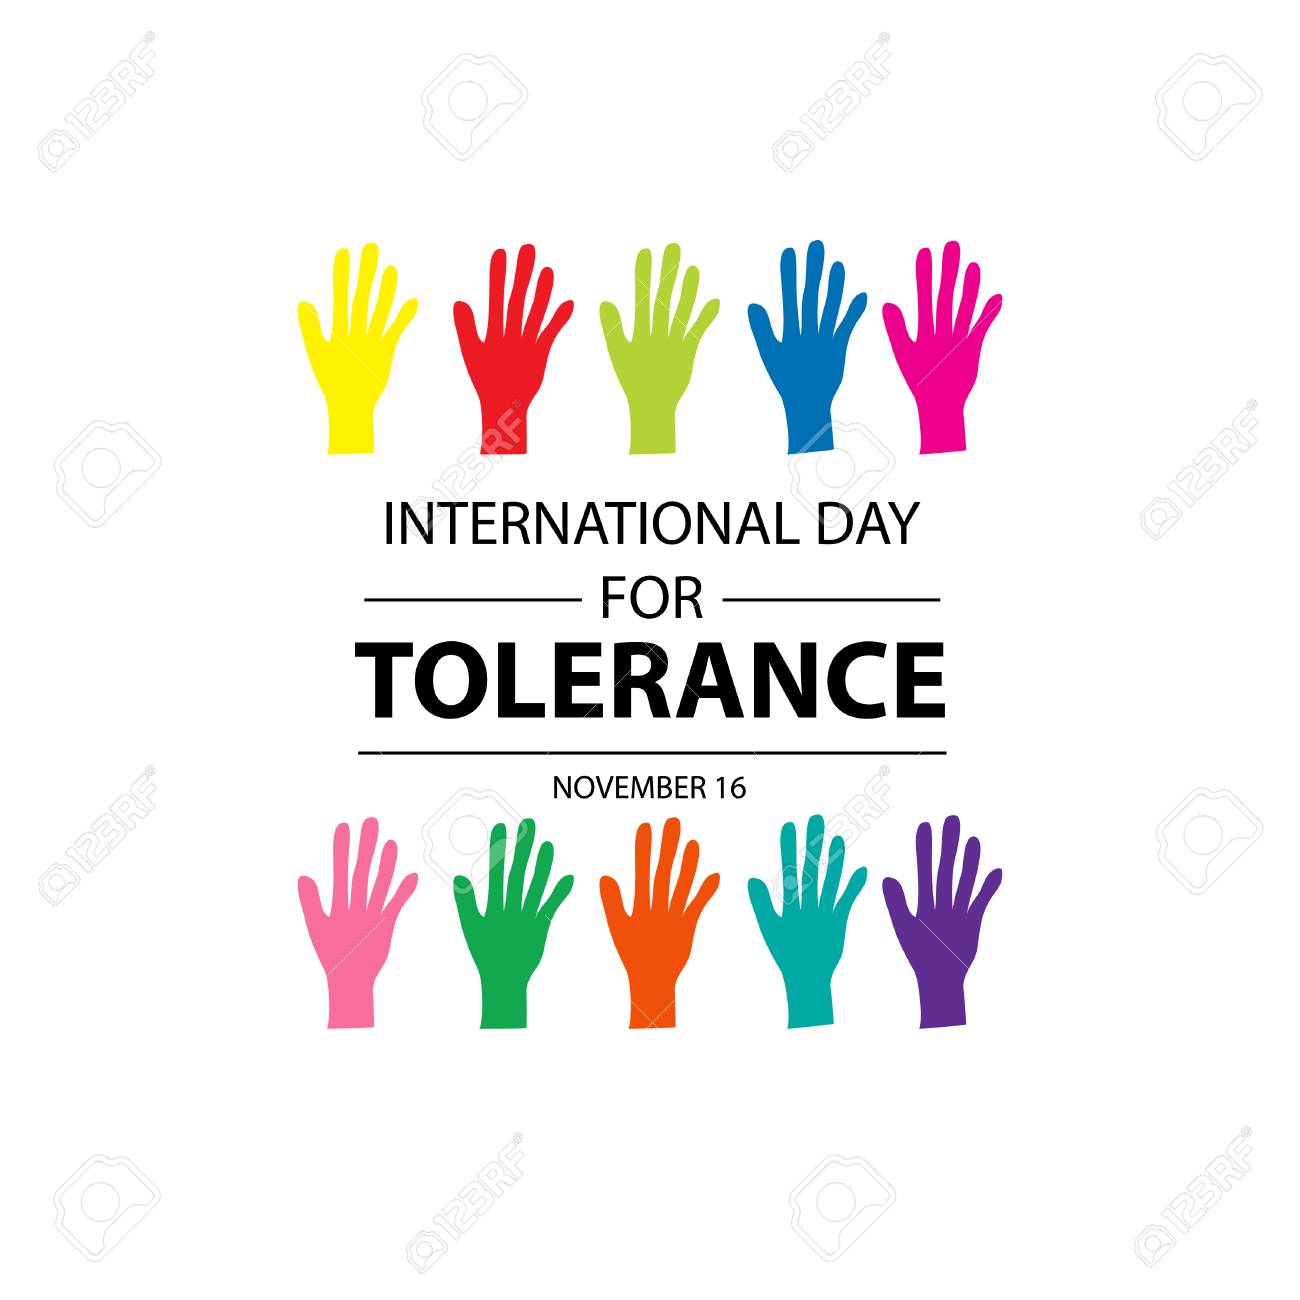 The International Day for Tolerance